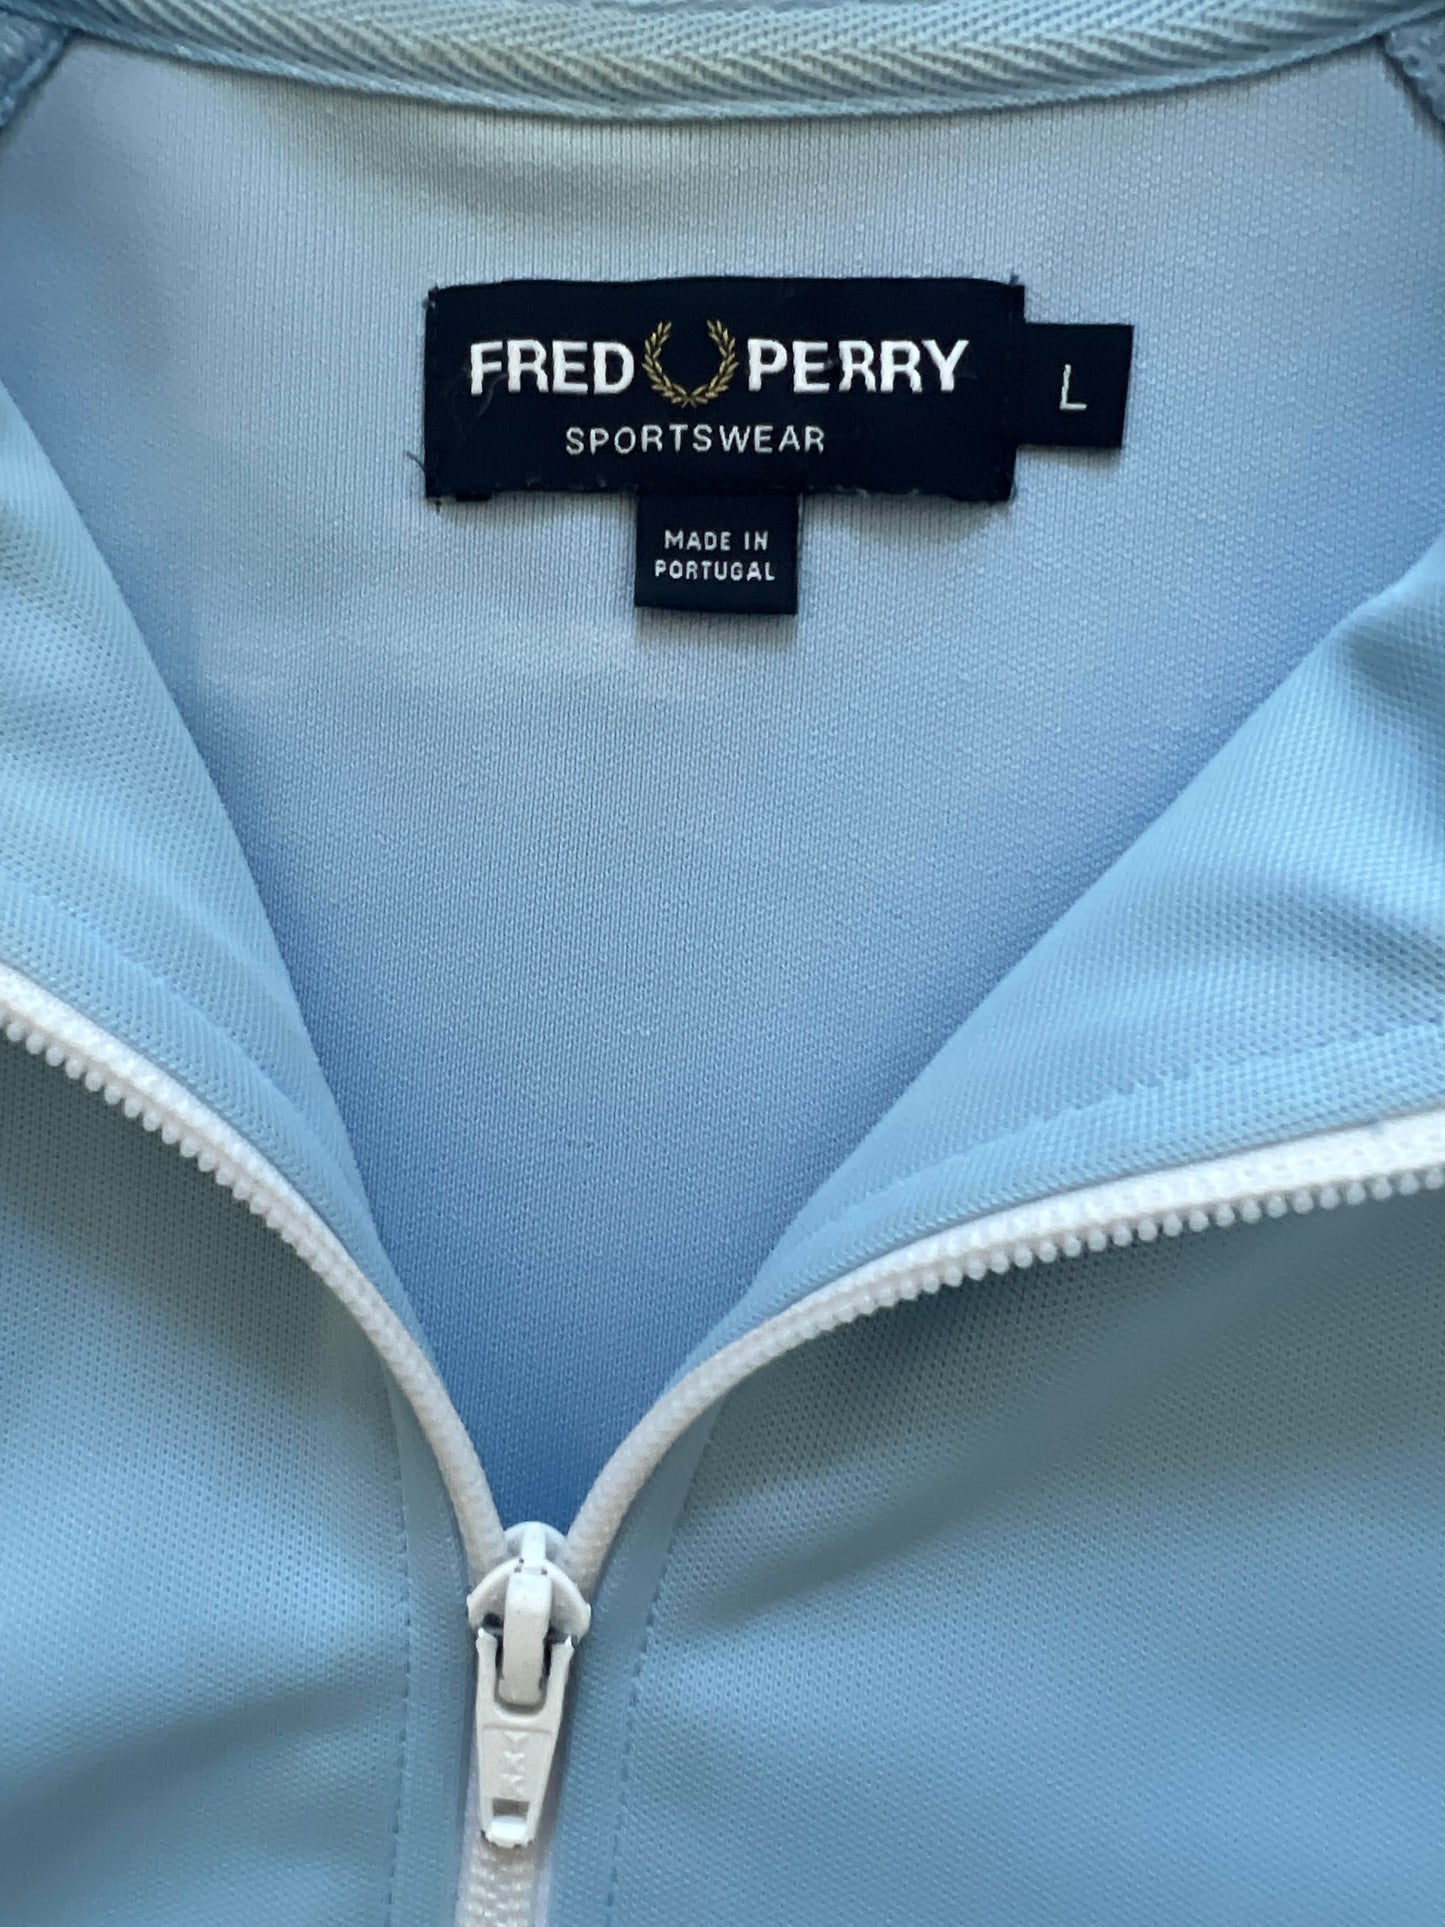 Fred Perry Full Zip Warm-Up Jacket (circa 2000s)